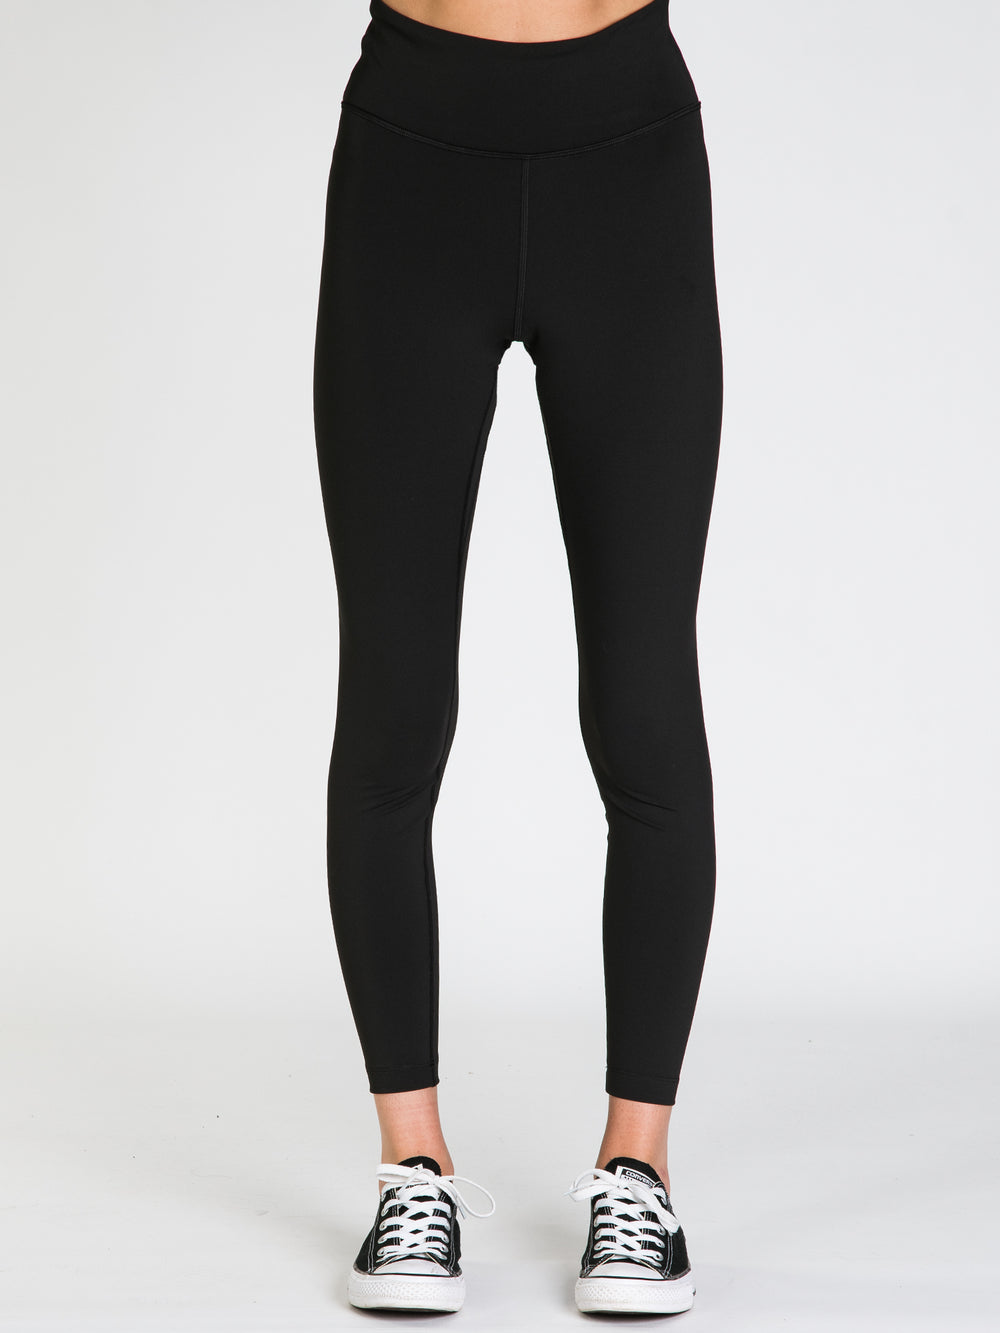 TENTREE IN MOTION HIGH-RISE LEGGING  - CLEARANCE